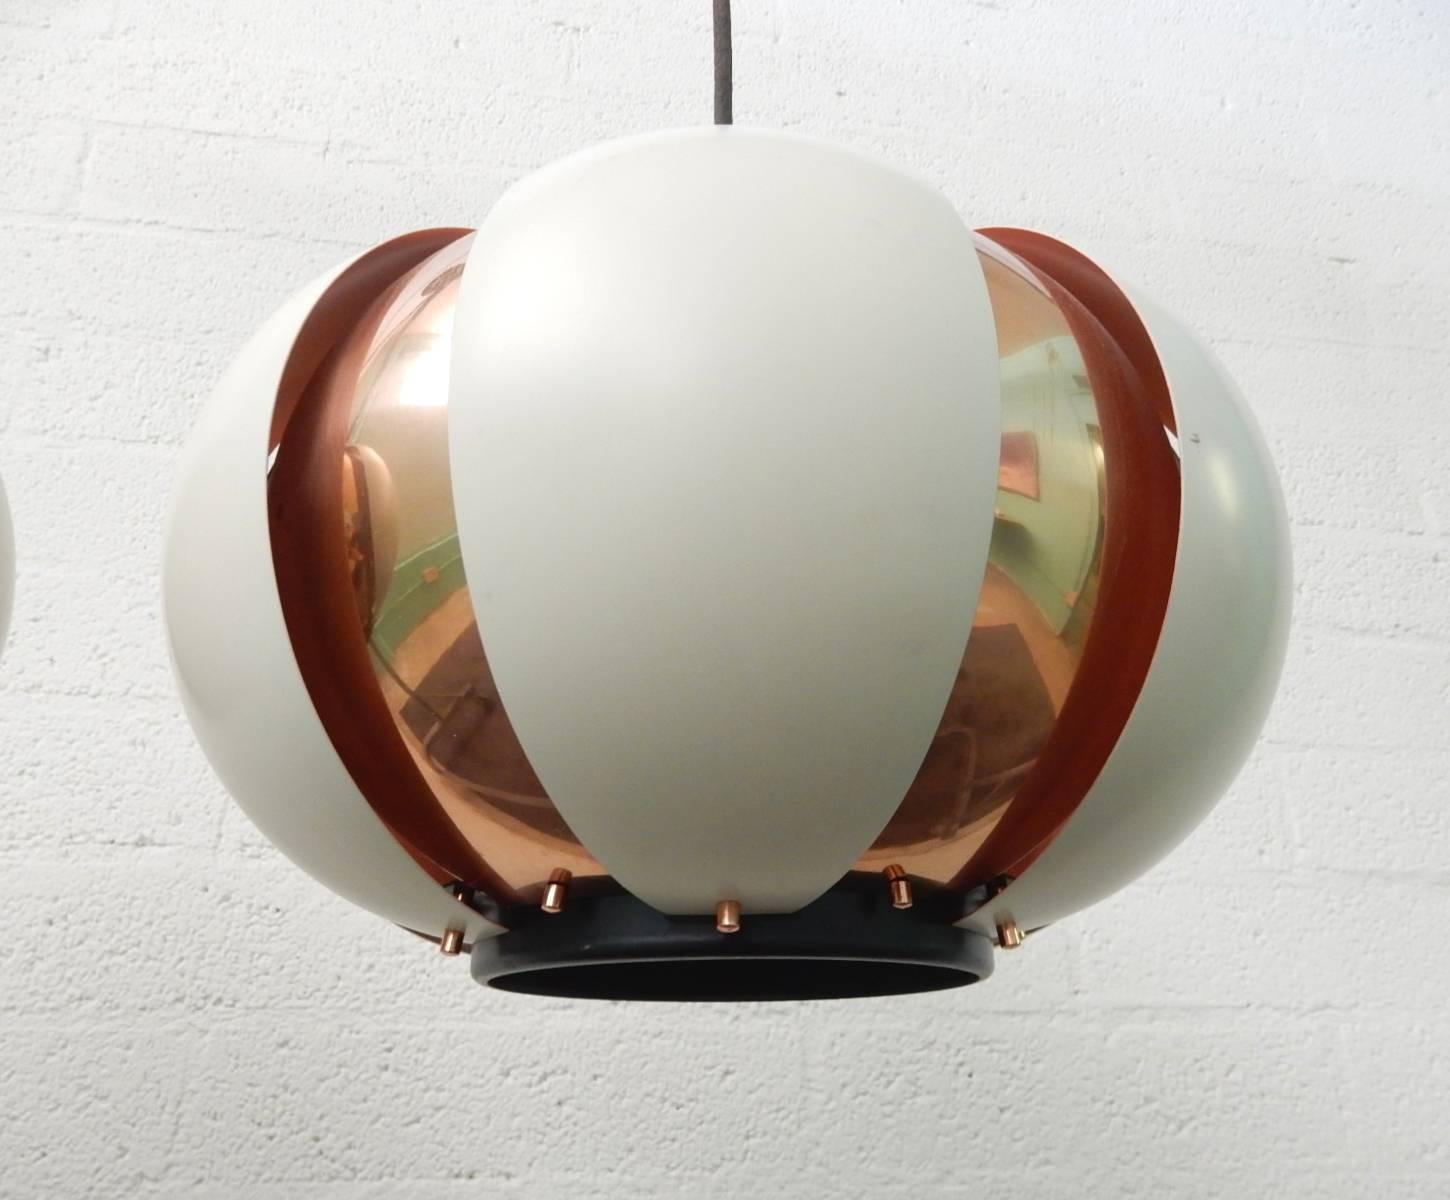 Pair of 1950s copper and white enamel louvered ball pendants lamps.
Both are complete and show just light wear/scratches. No dents.
Each takes a standard light bulb. Black cloth wiring is original but solid. No ceiling caps or mounting hardware